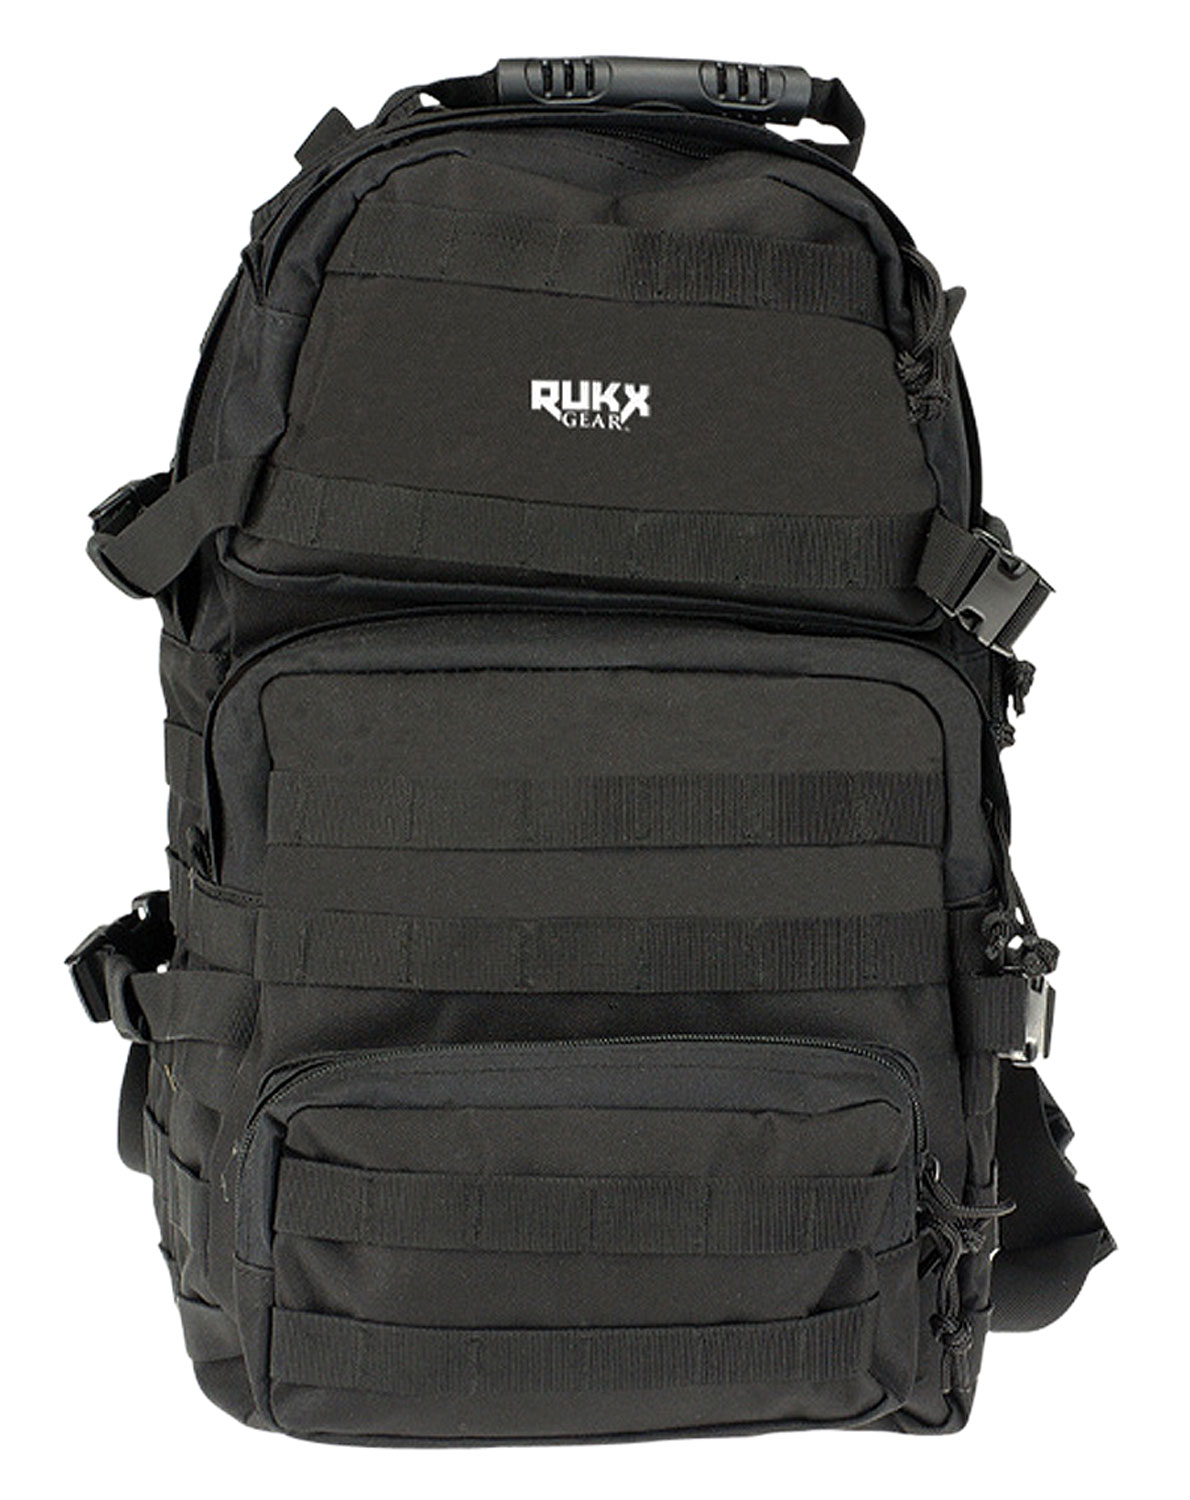 RUKX GEAR Tactical 3 Day 600D Polyester 16